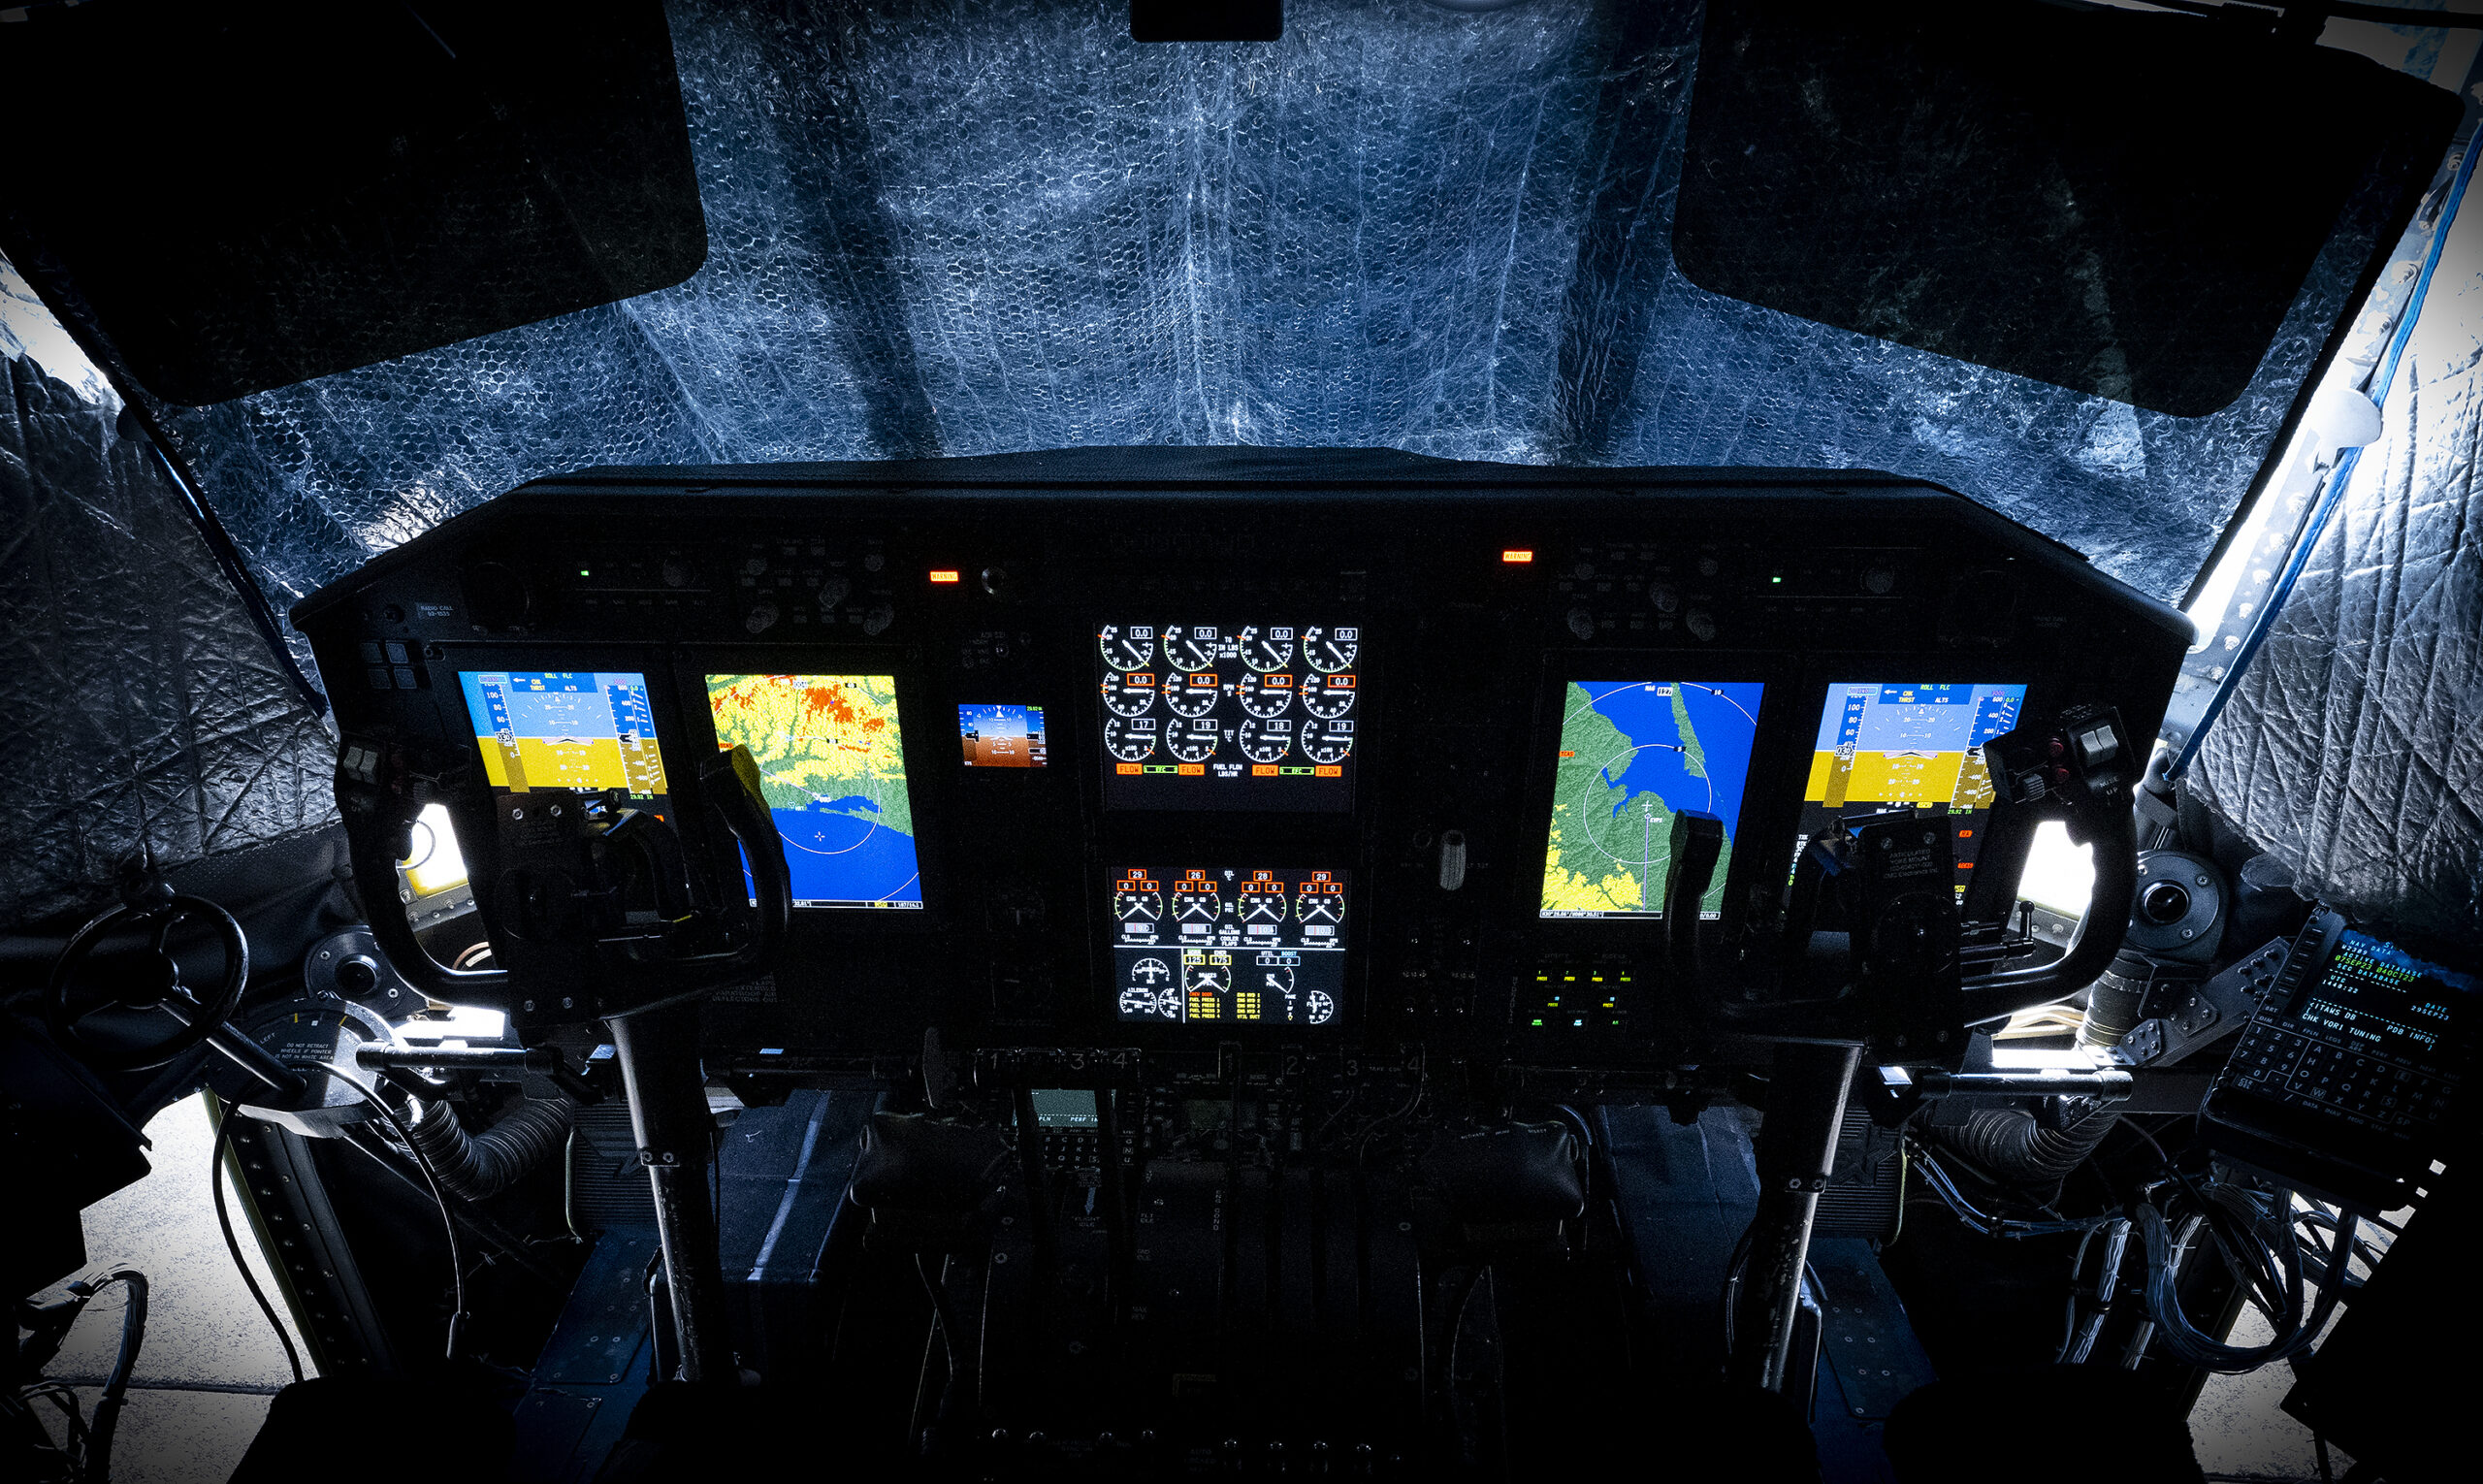 The newly all digital C-130H cockpit sits ready for its next test flight at Eglin Air Force Base, Fla. The major upgrade, called Avionics Modernization Program Increment 2, is a significant improvement to the almost 60-year-old aircraft’s avionics and navigation systems. (U.S. Air Force photo/Samuel King Jr.)